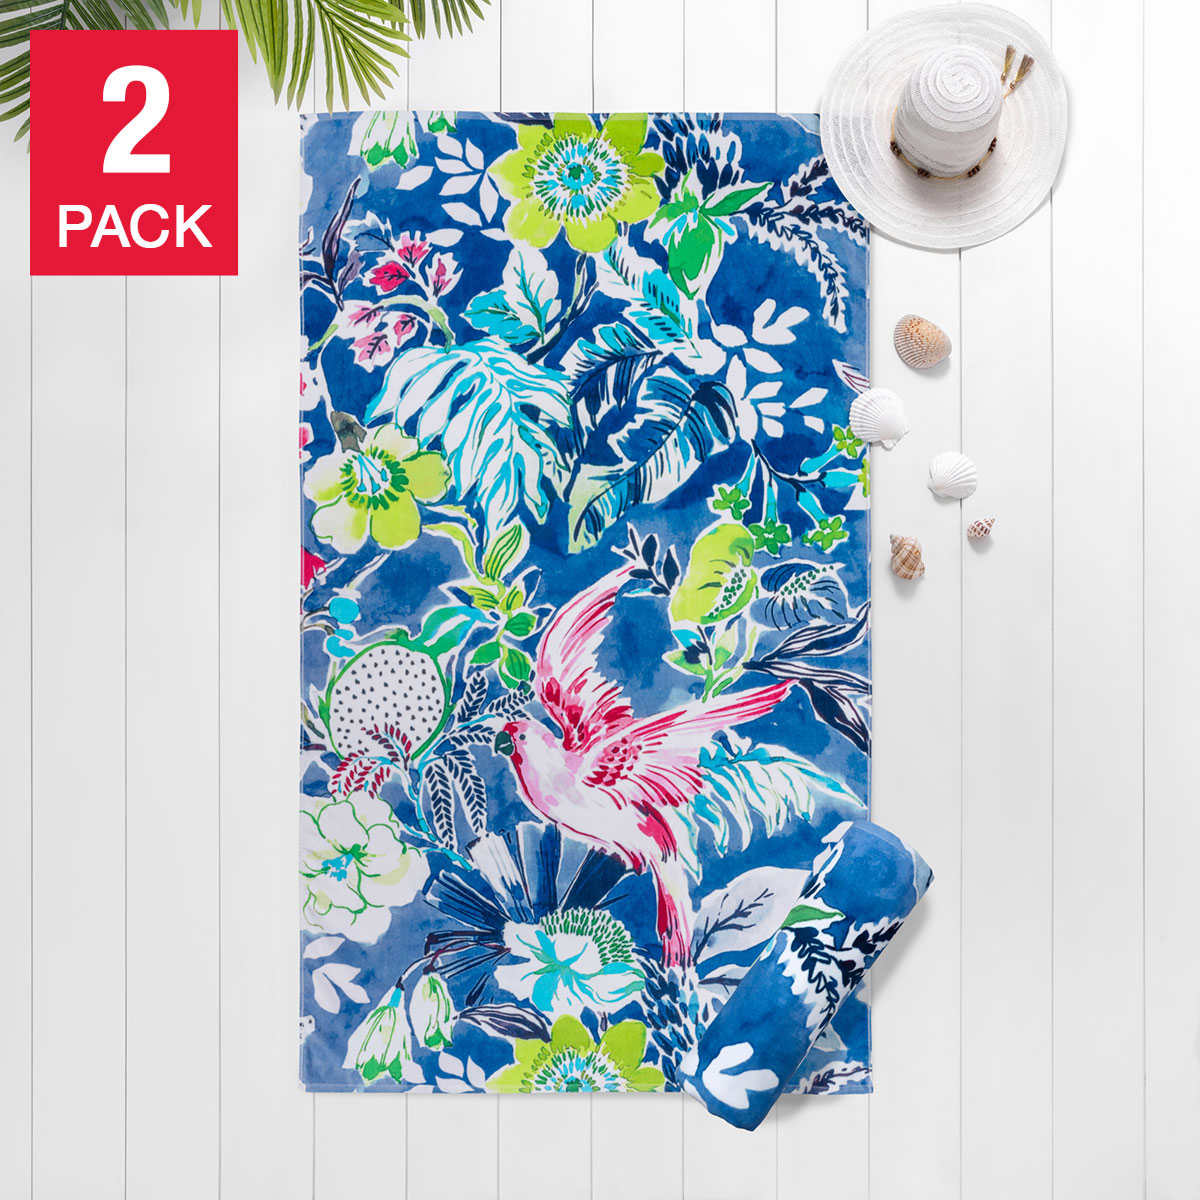 Boating Luxuriously Soft Retro Design Beach Towel in Two Sizes